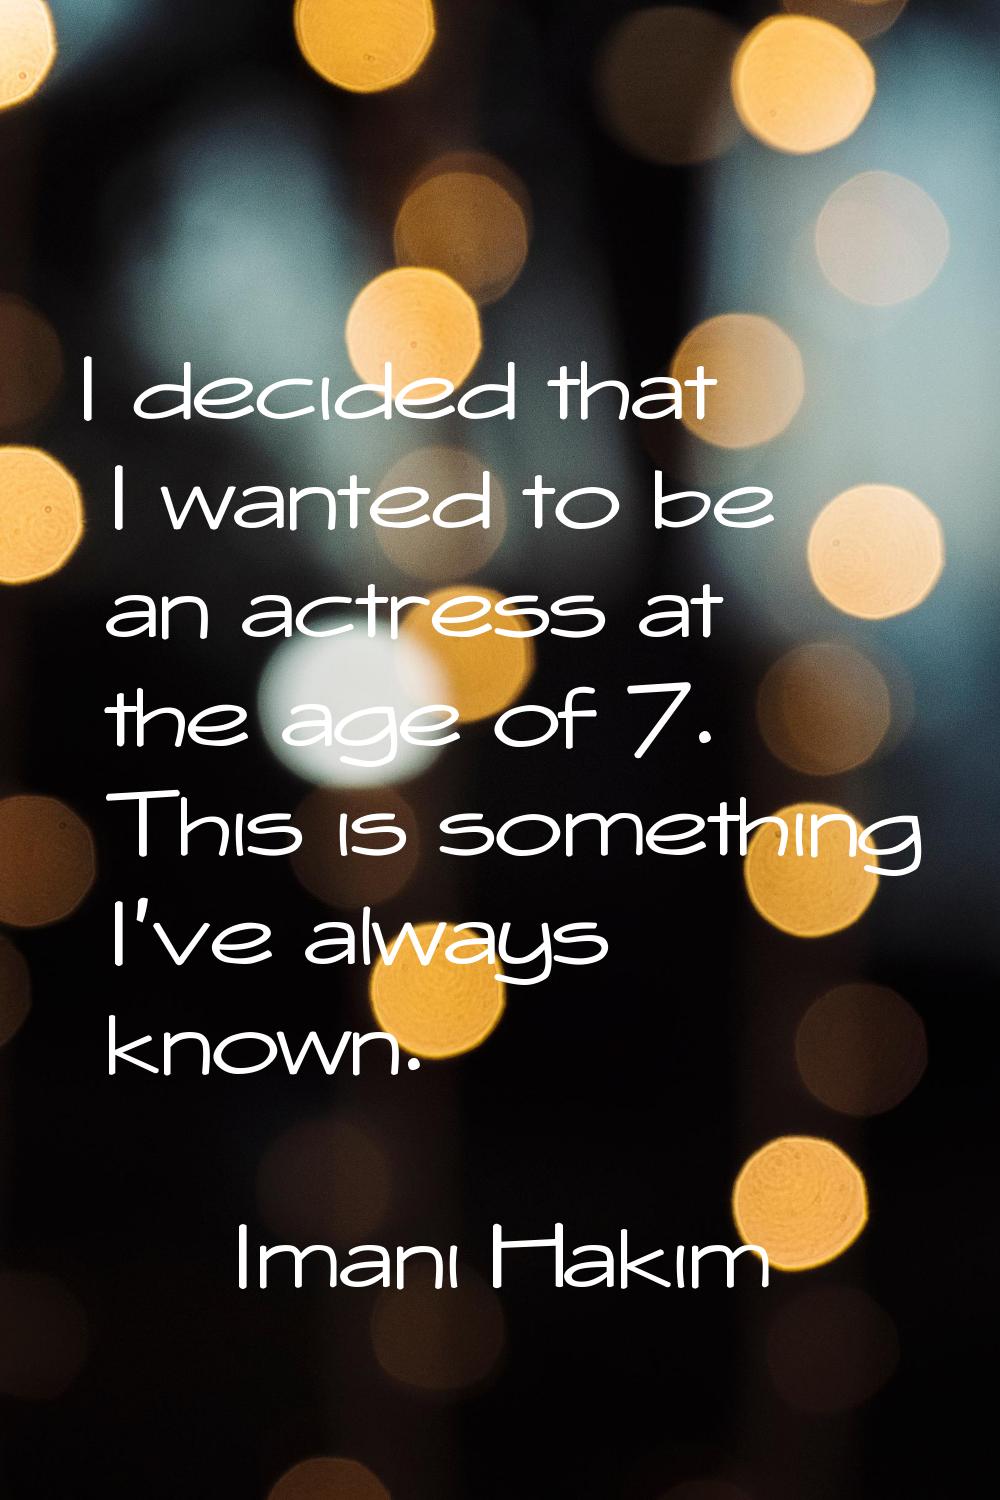 I decided that I wanted to be an actress at the age of 7. This is something I've always known.